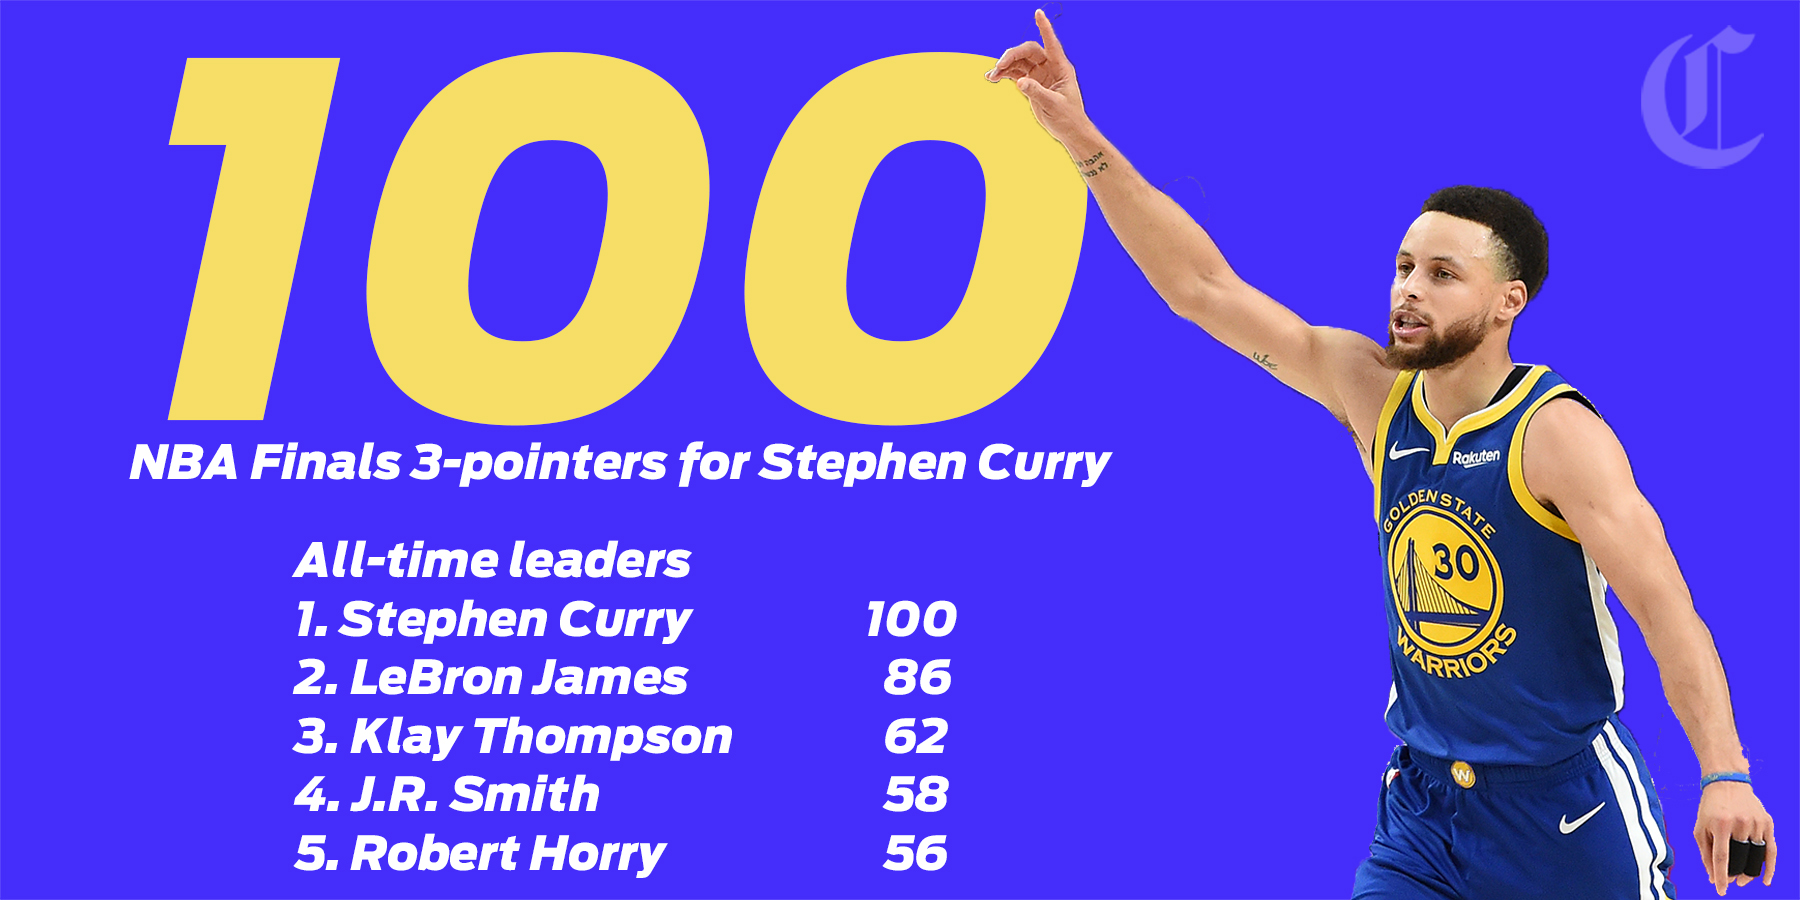 Warriors' Stephen Curry shoots into NBA Finals history in Game 1